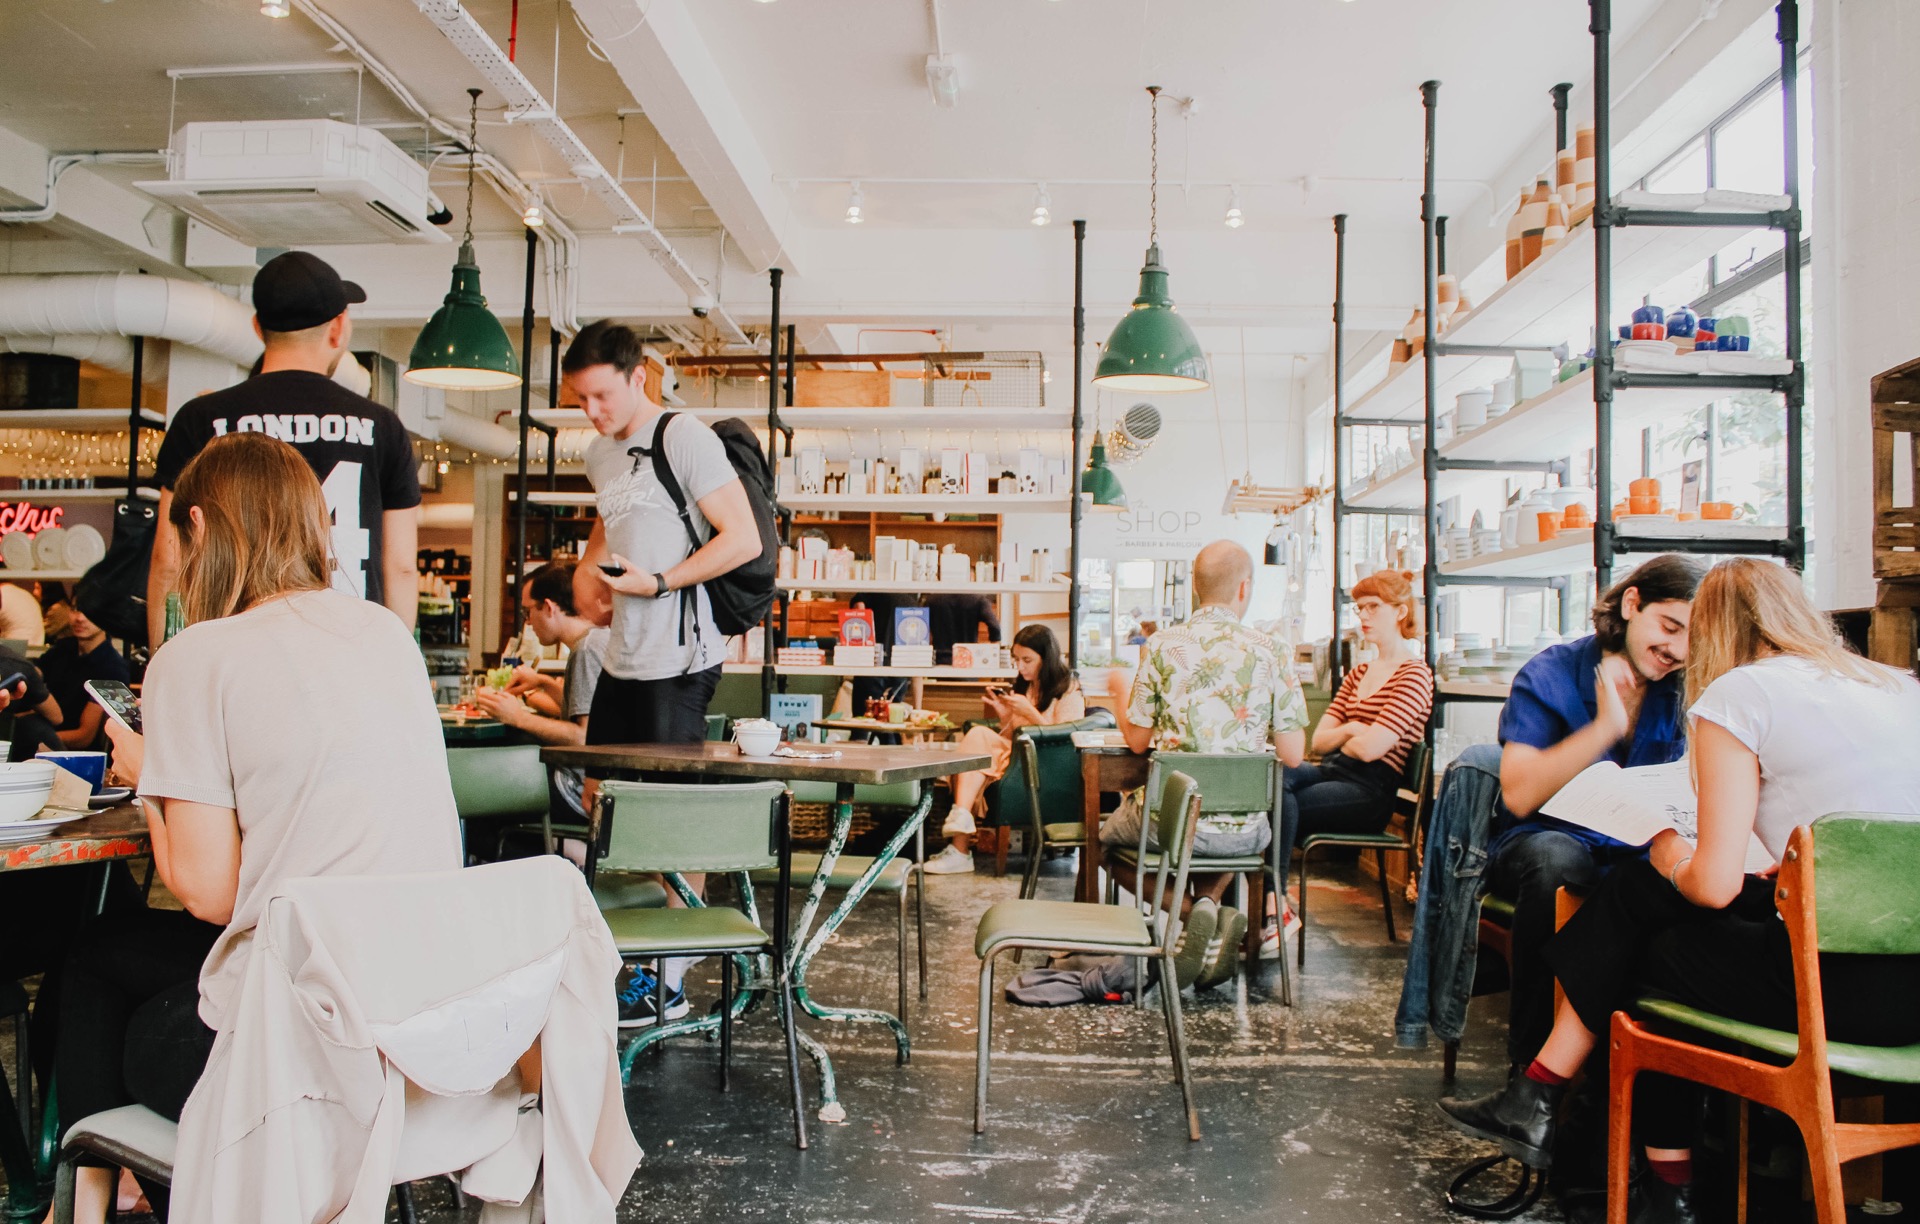 How do you attract customers to your restaurant?